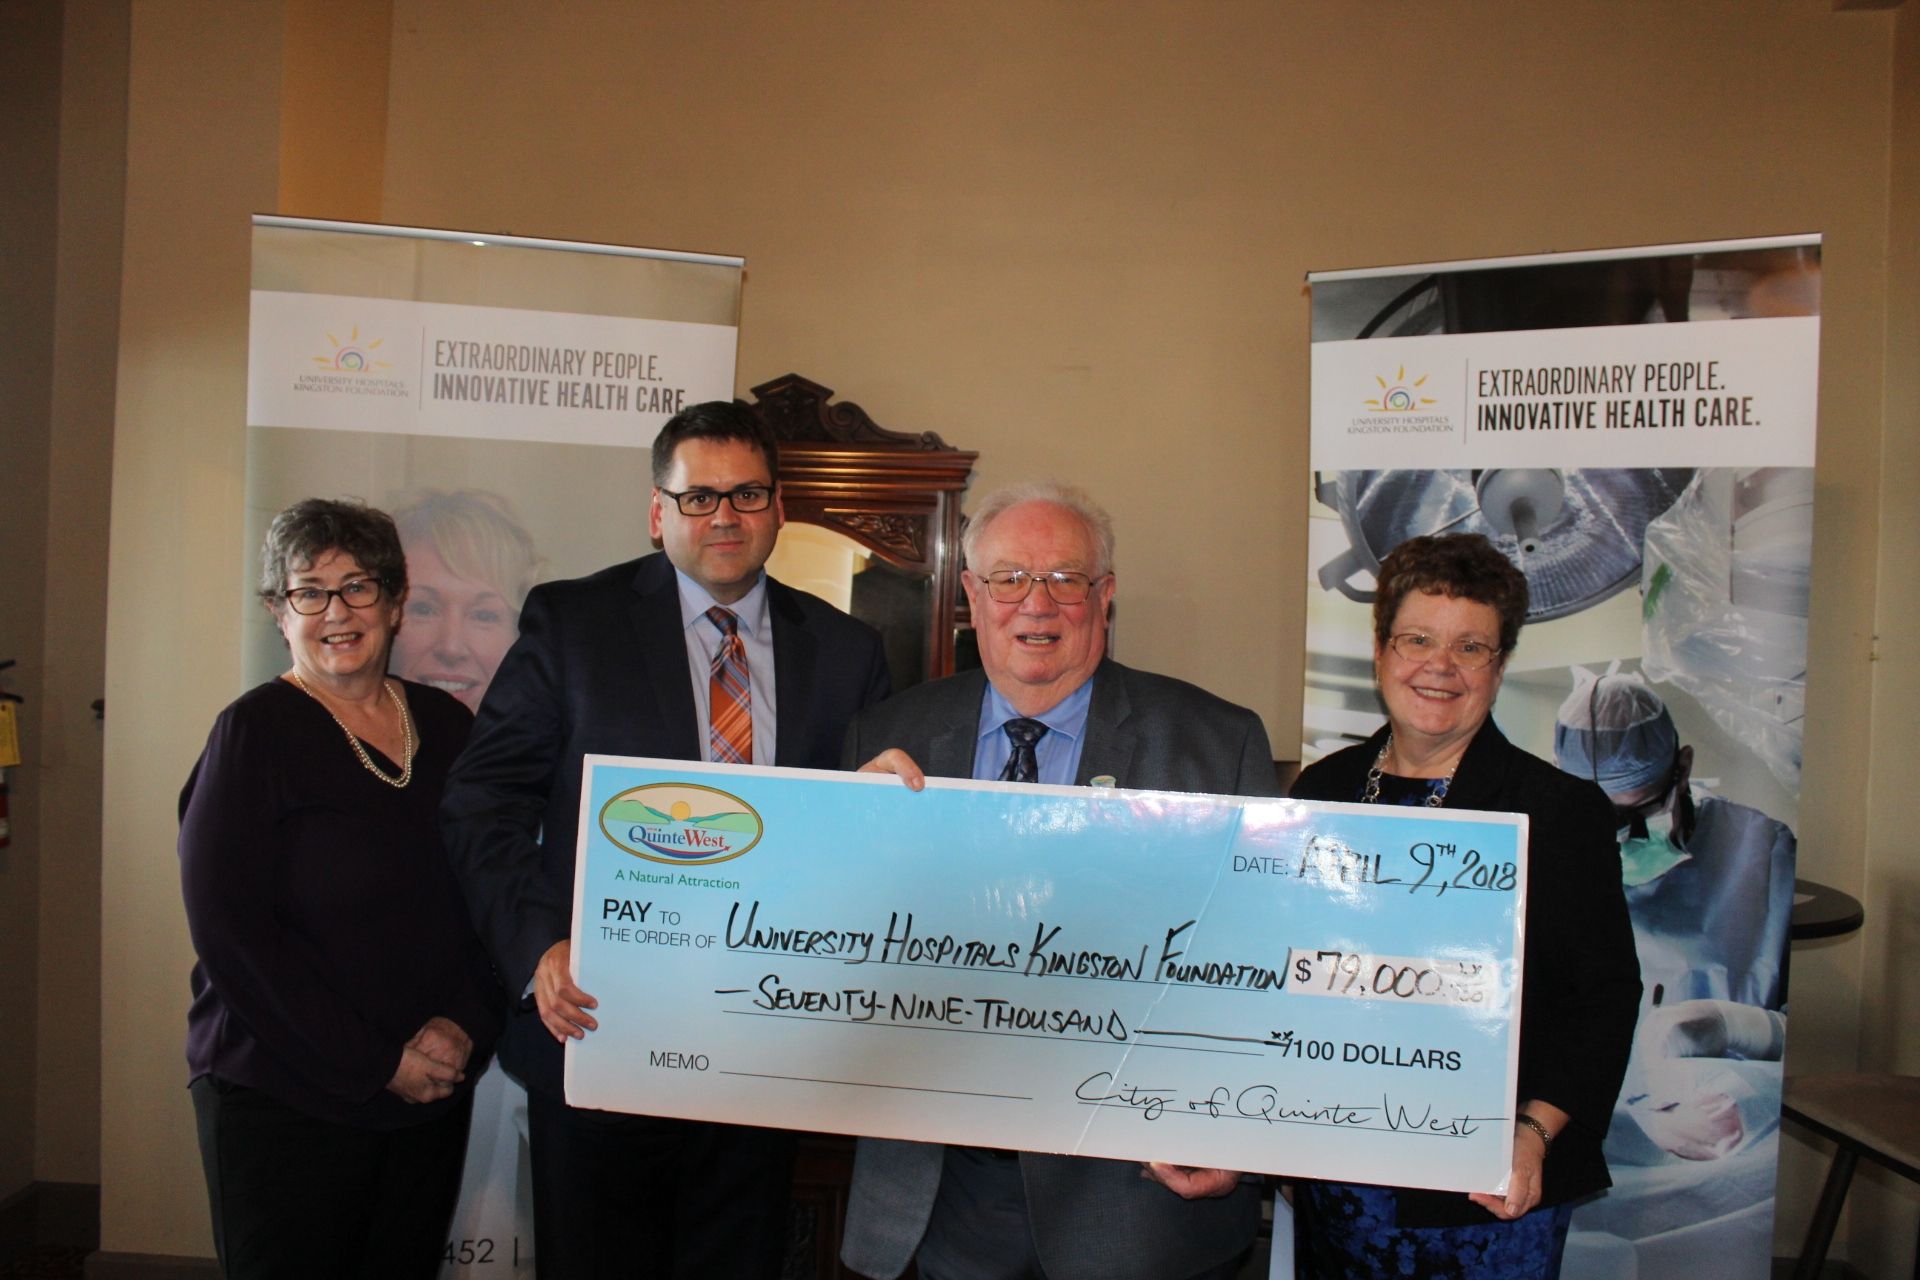 Mayor Harrison (second from right) presents a cheque on behalf of the municipality of Quinte West